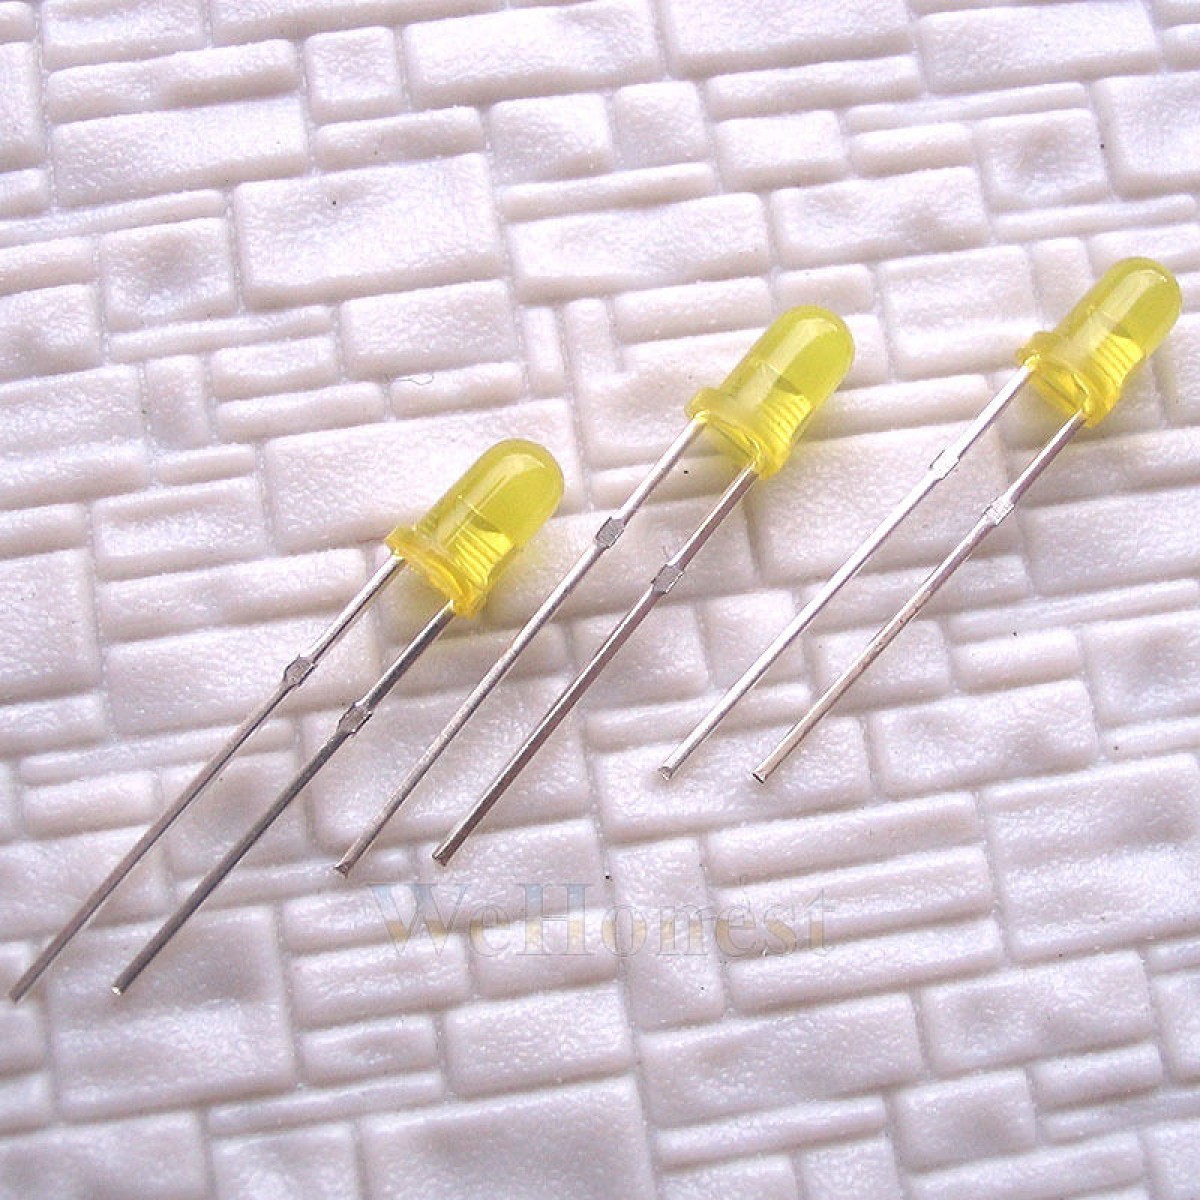 20 x Auto Twinkle Flash Yellow LEDs 3mm ( flash every one second )